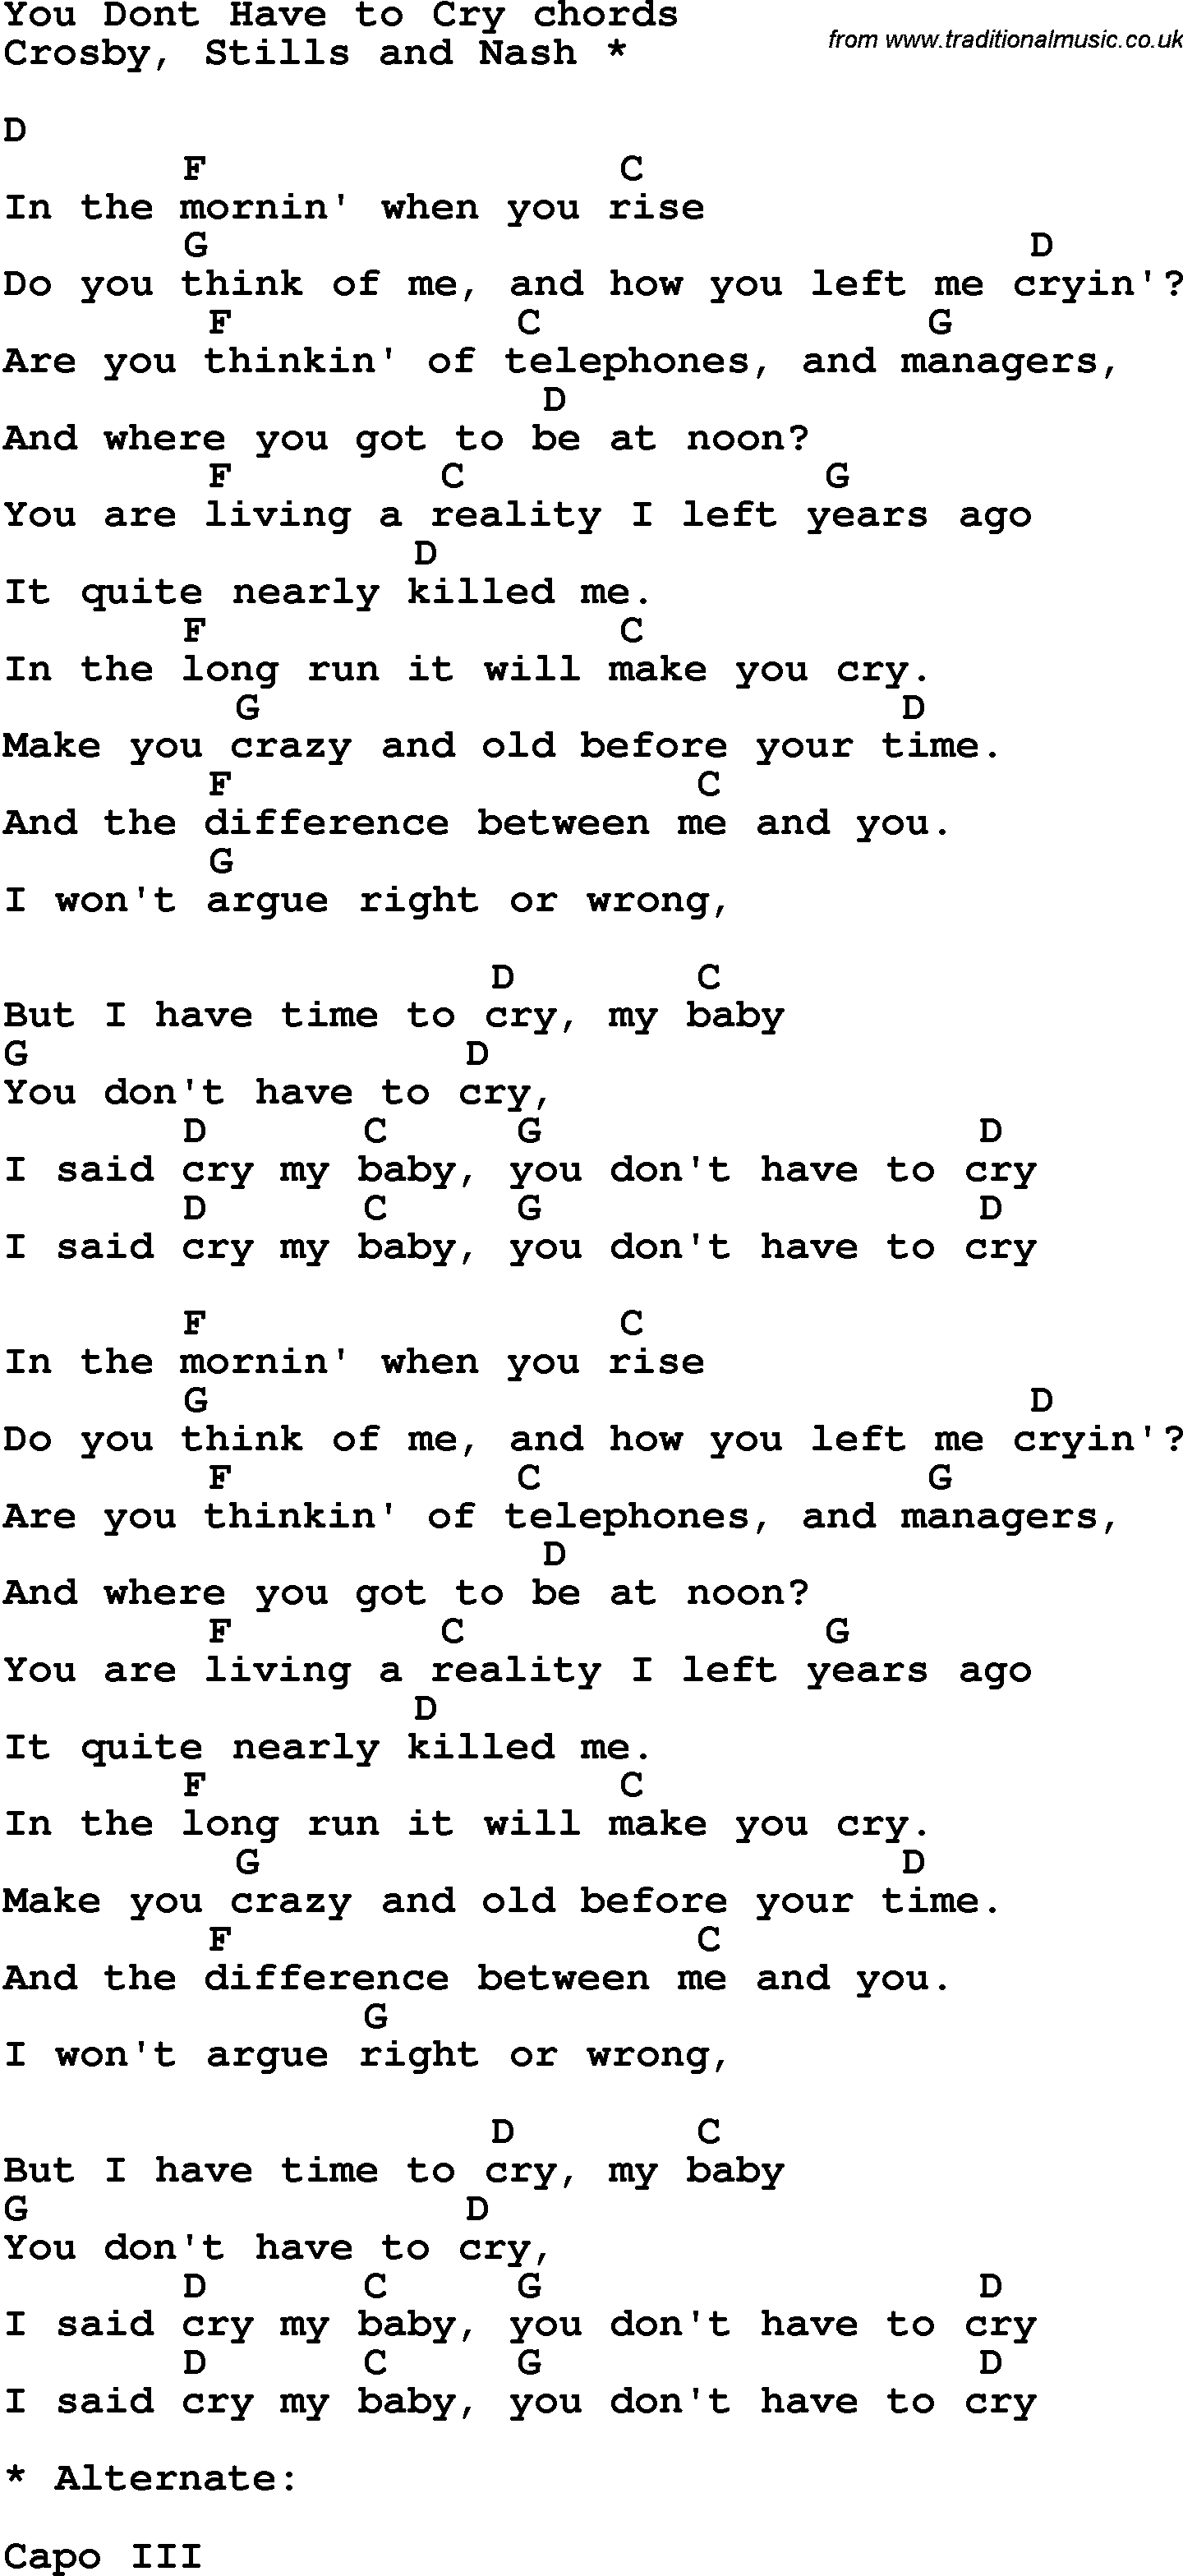 Song Lyrics with guitar chords for You Don't Haveto Cry